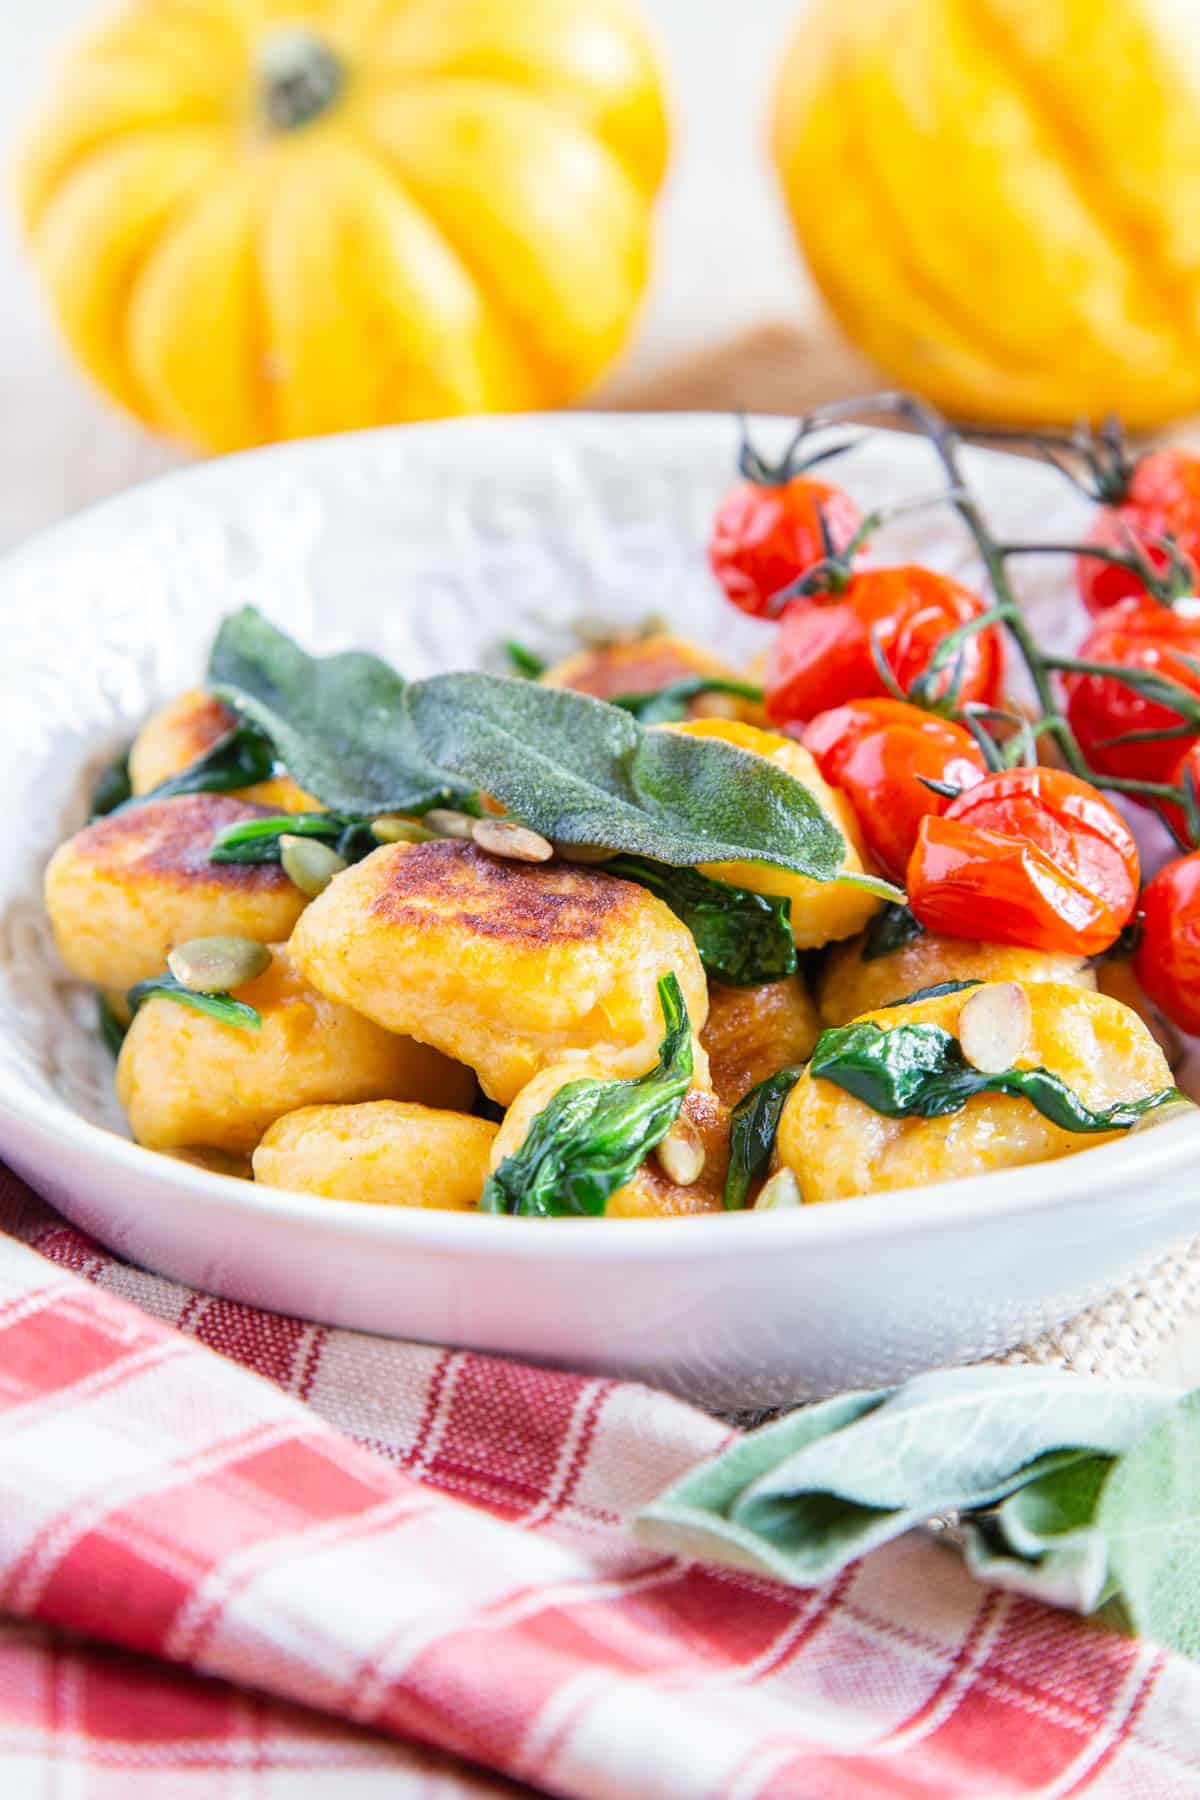 A bowl of golden pumpkin gnocchi with crispy fried sage and cherry tomatoes on the side, set on a red and white cloth with winter squash in the background.